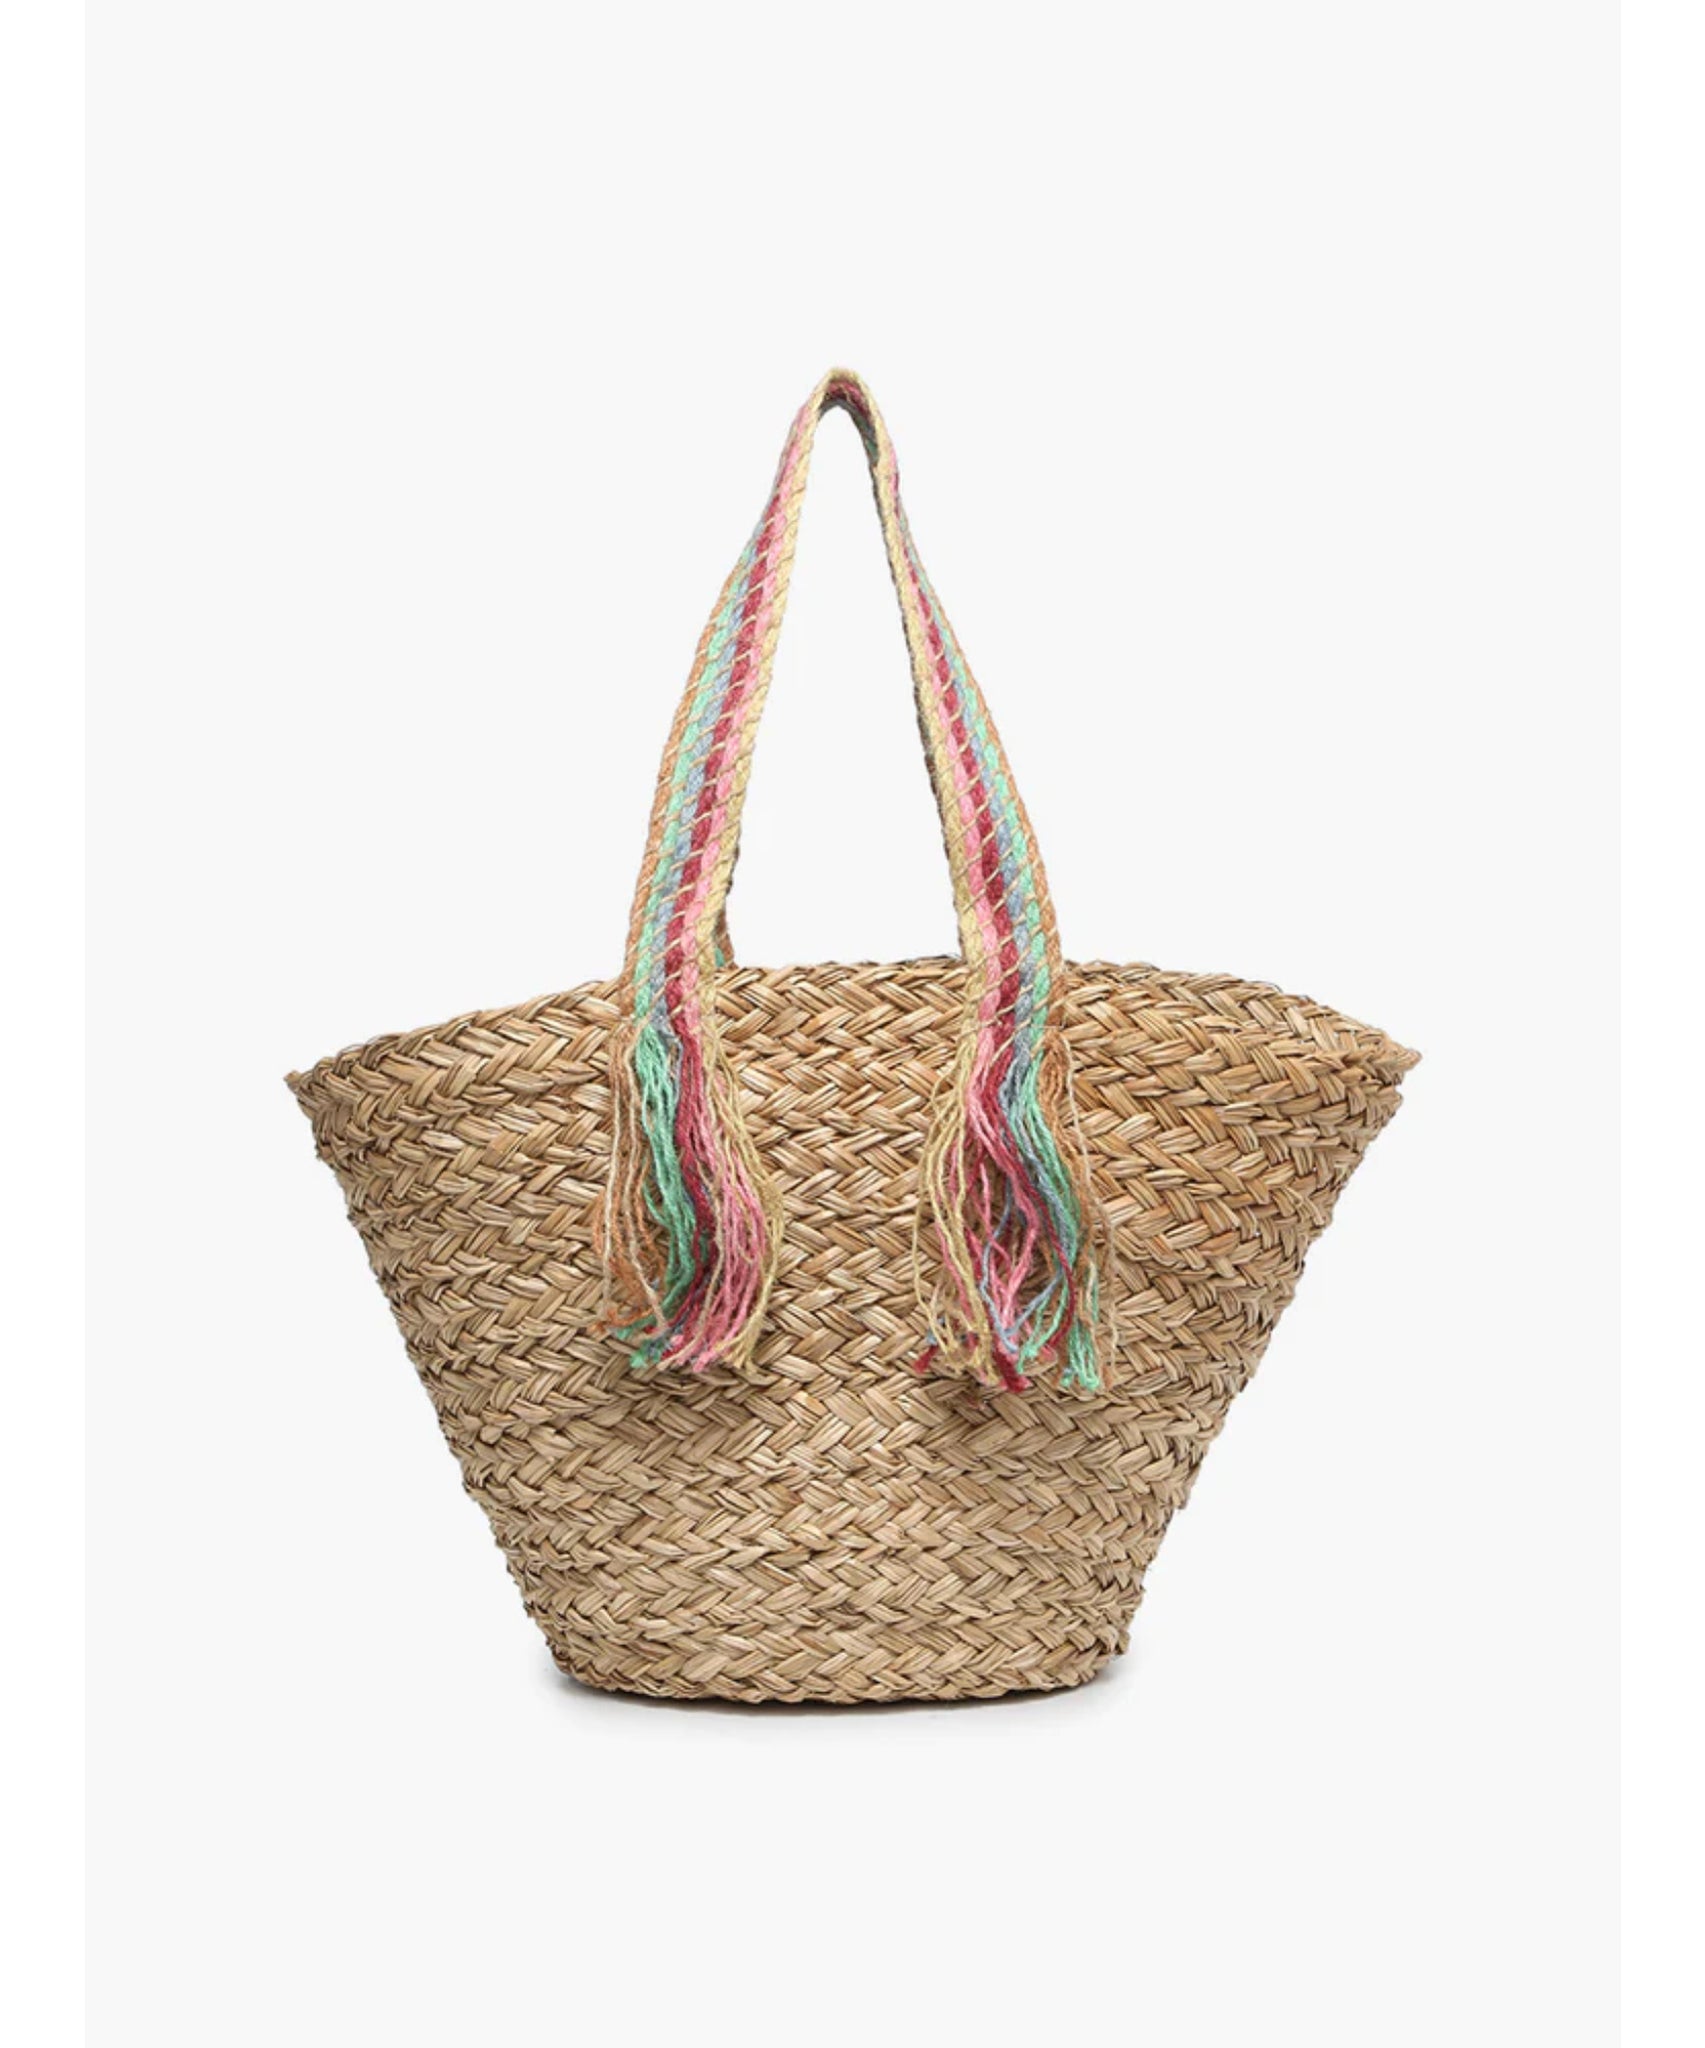 Indie Seagrass Tote w/Fringe